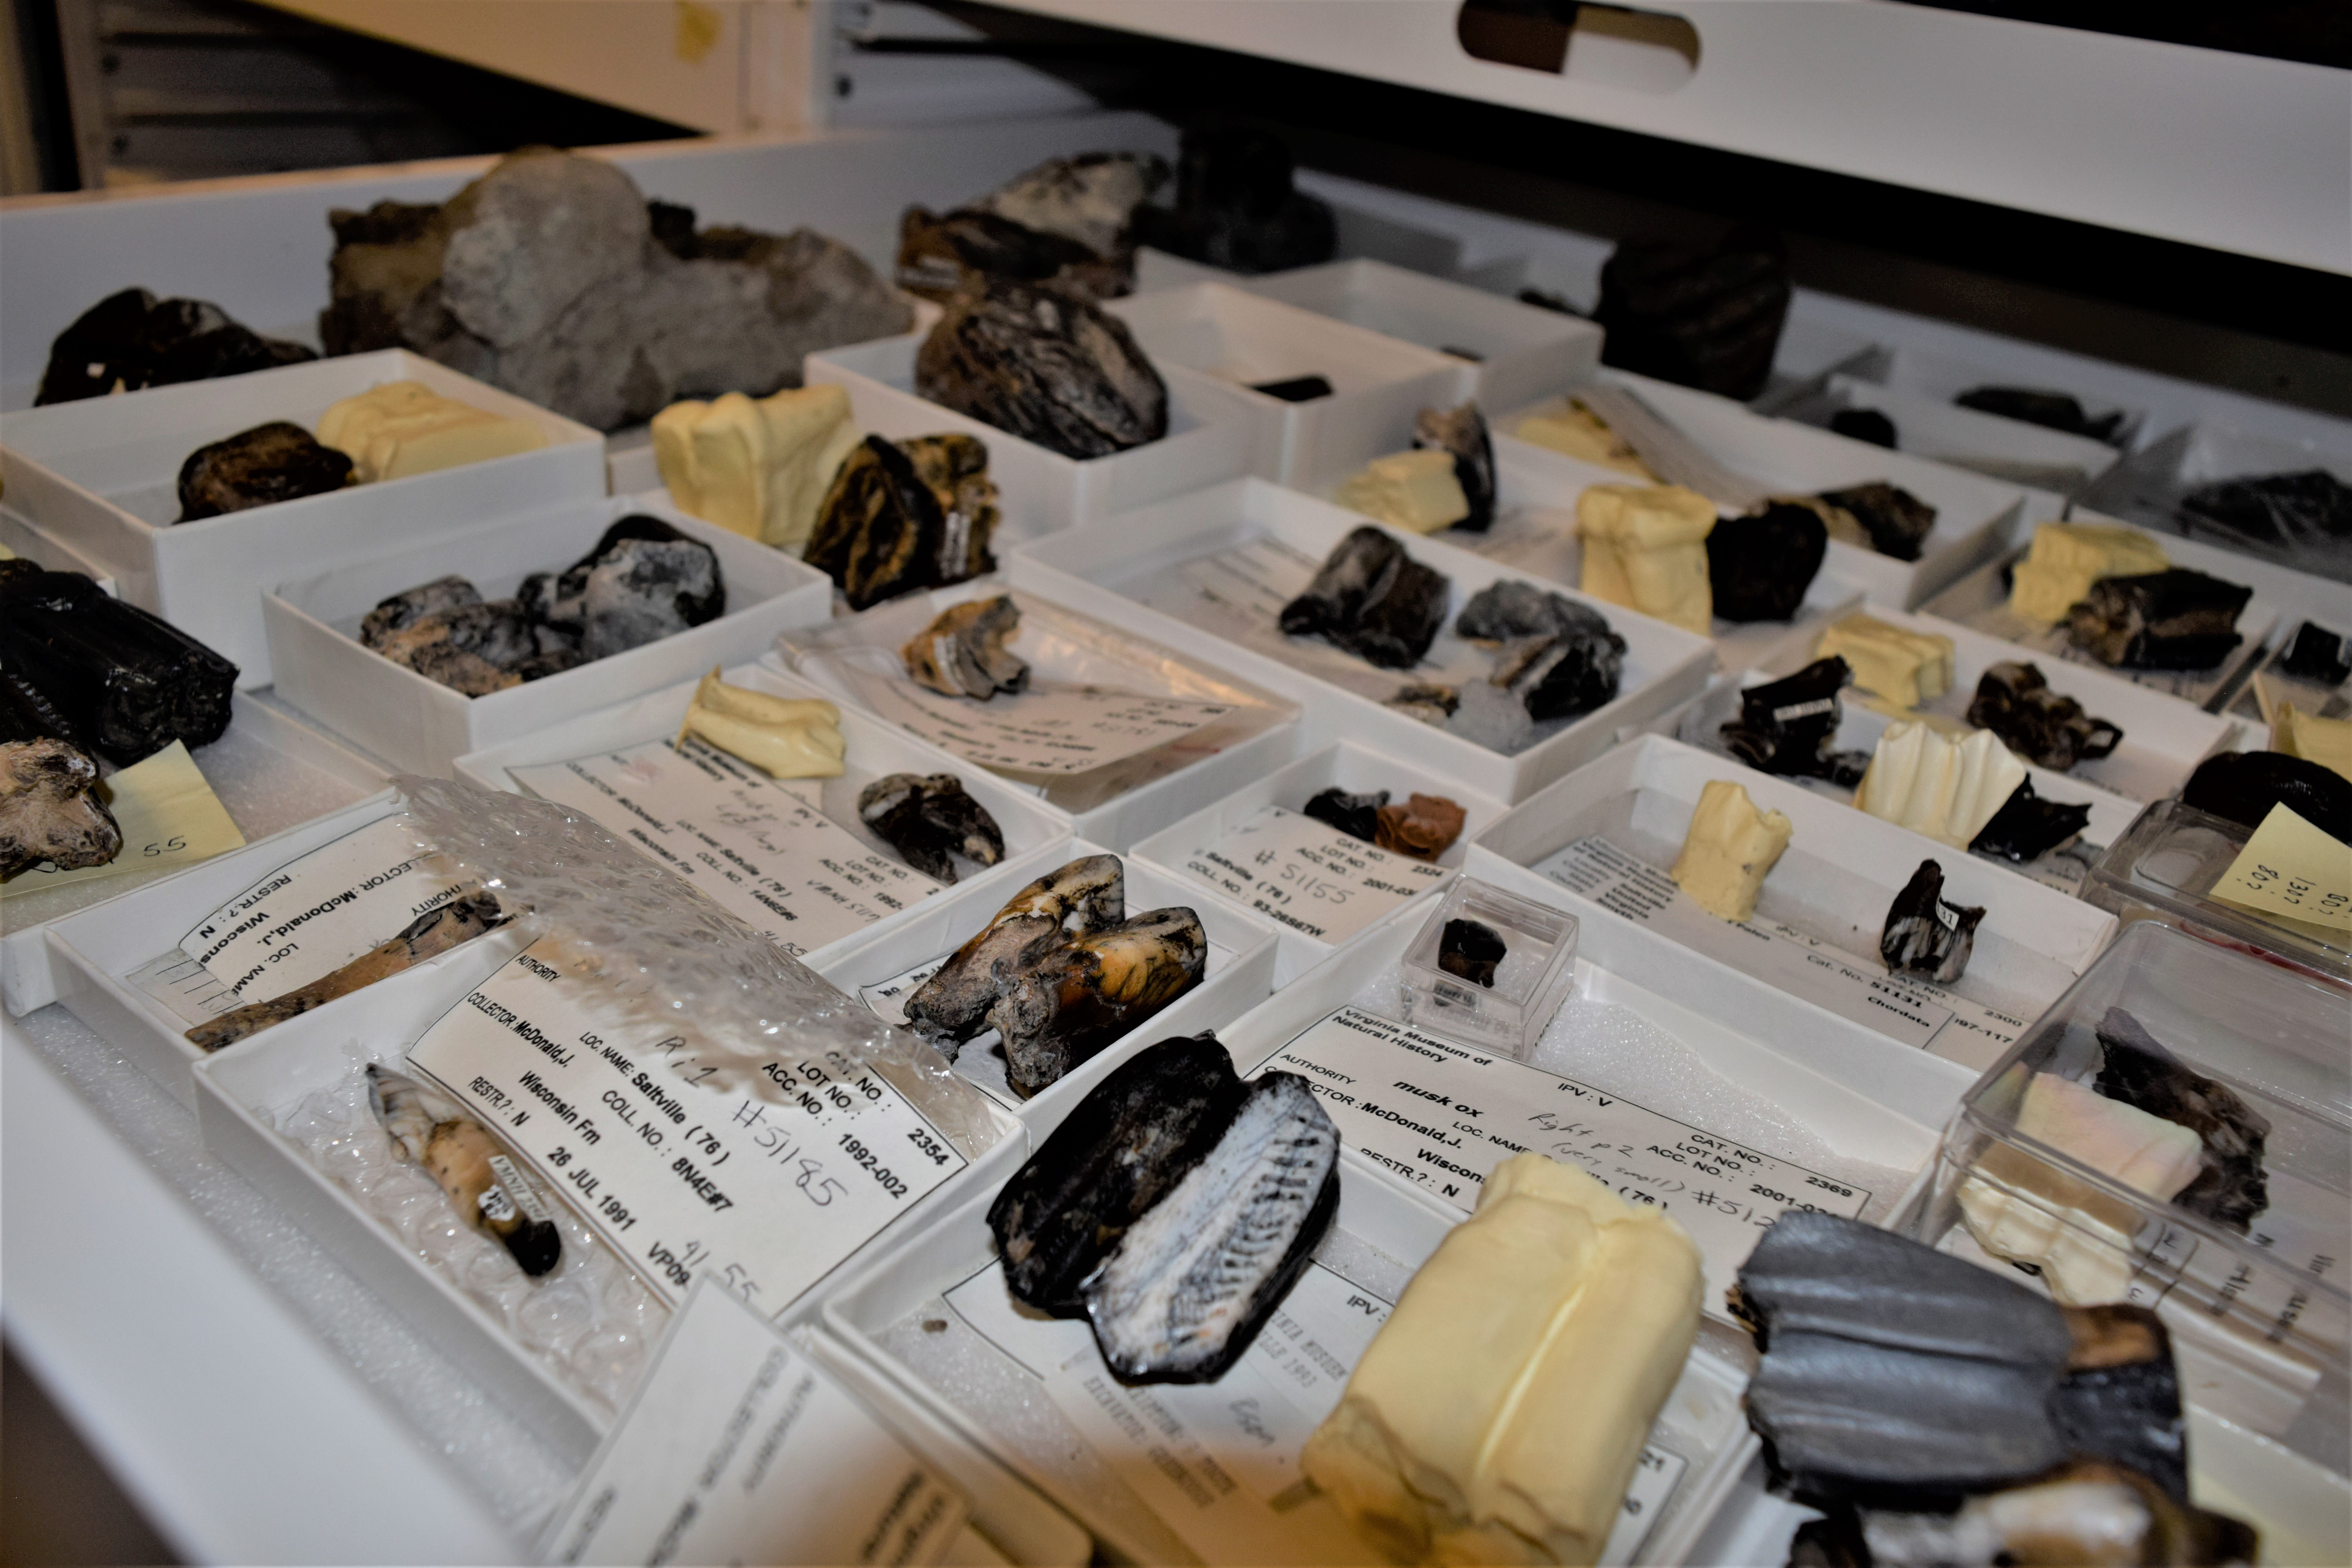 Isolated teeth from artiodactyls, including musk oxen and cervids